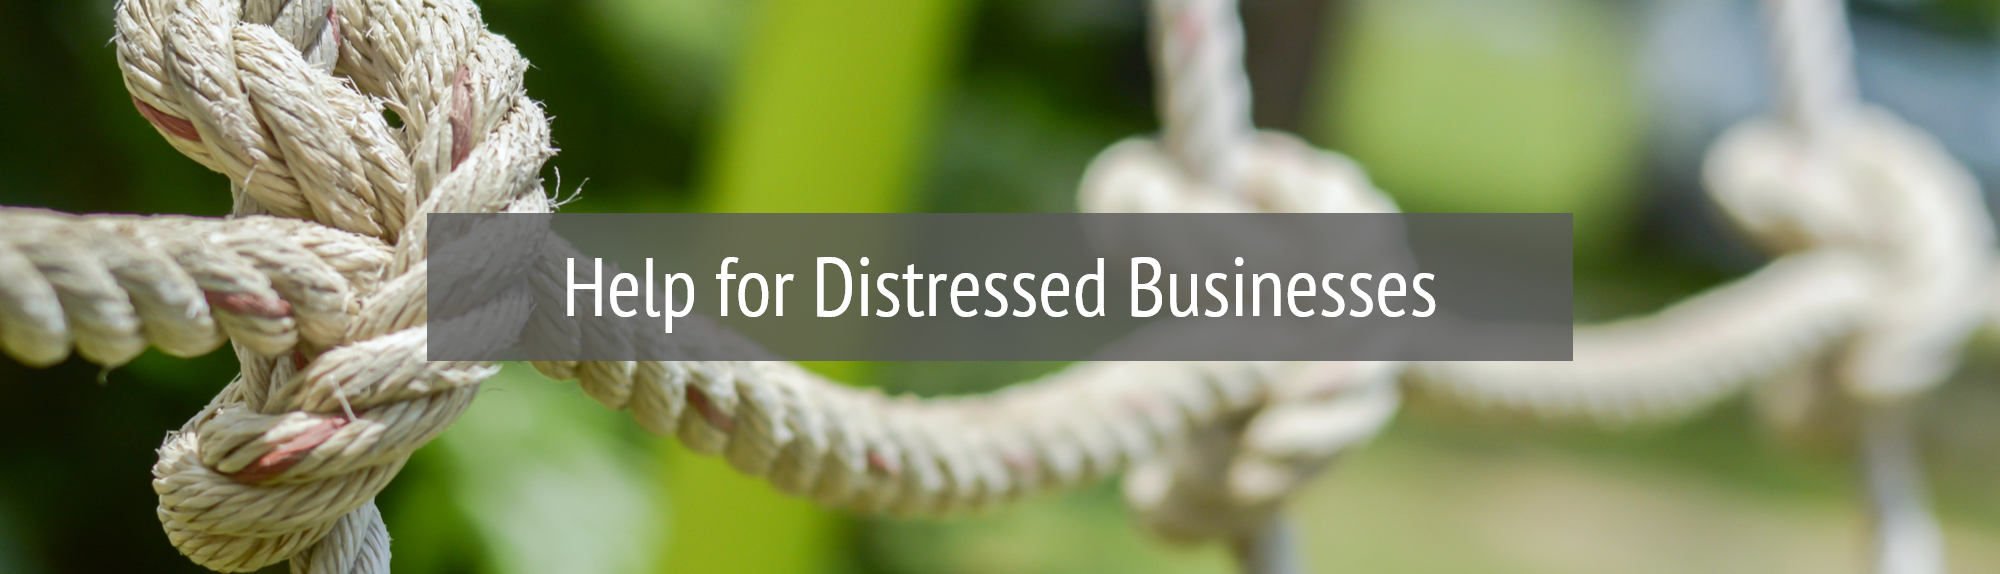 Help for Distressed Businesses